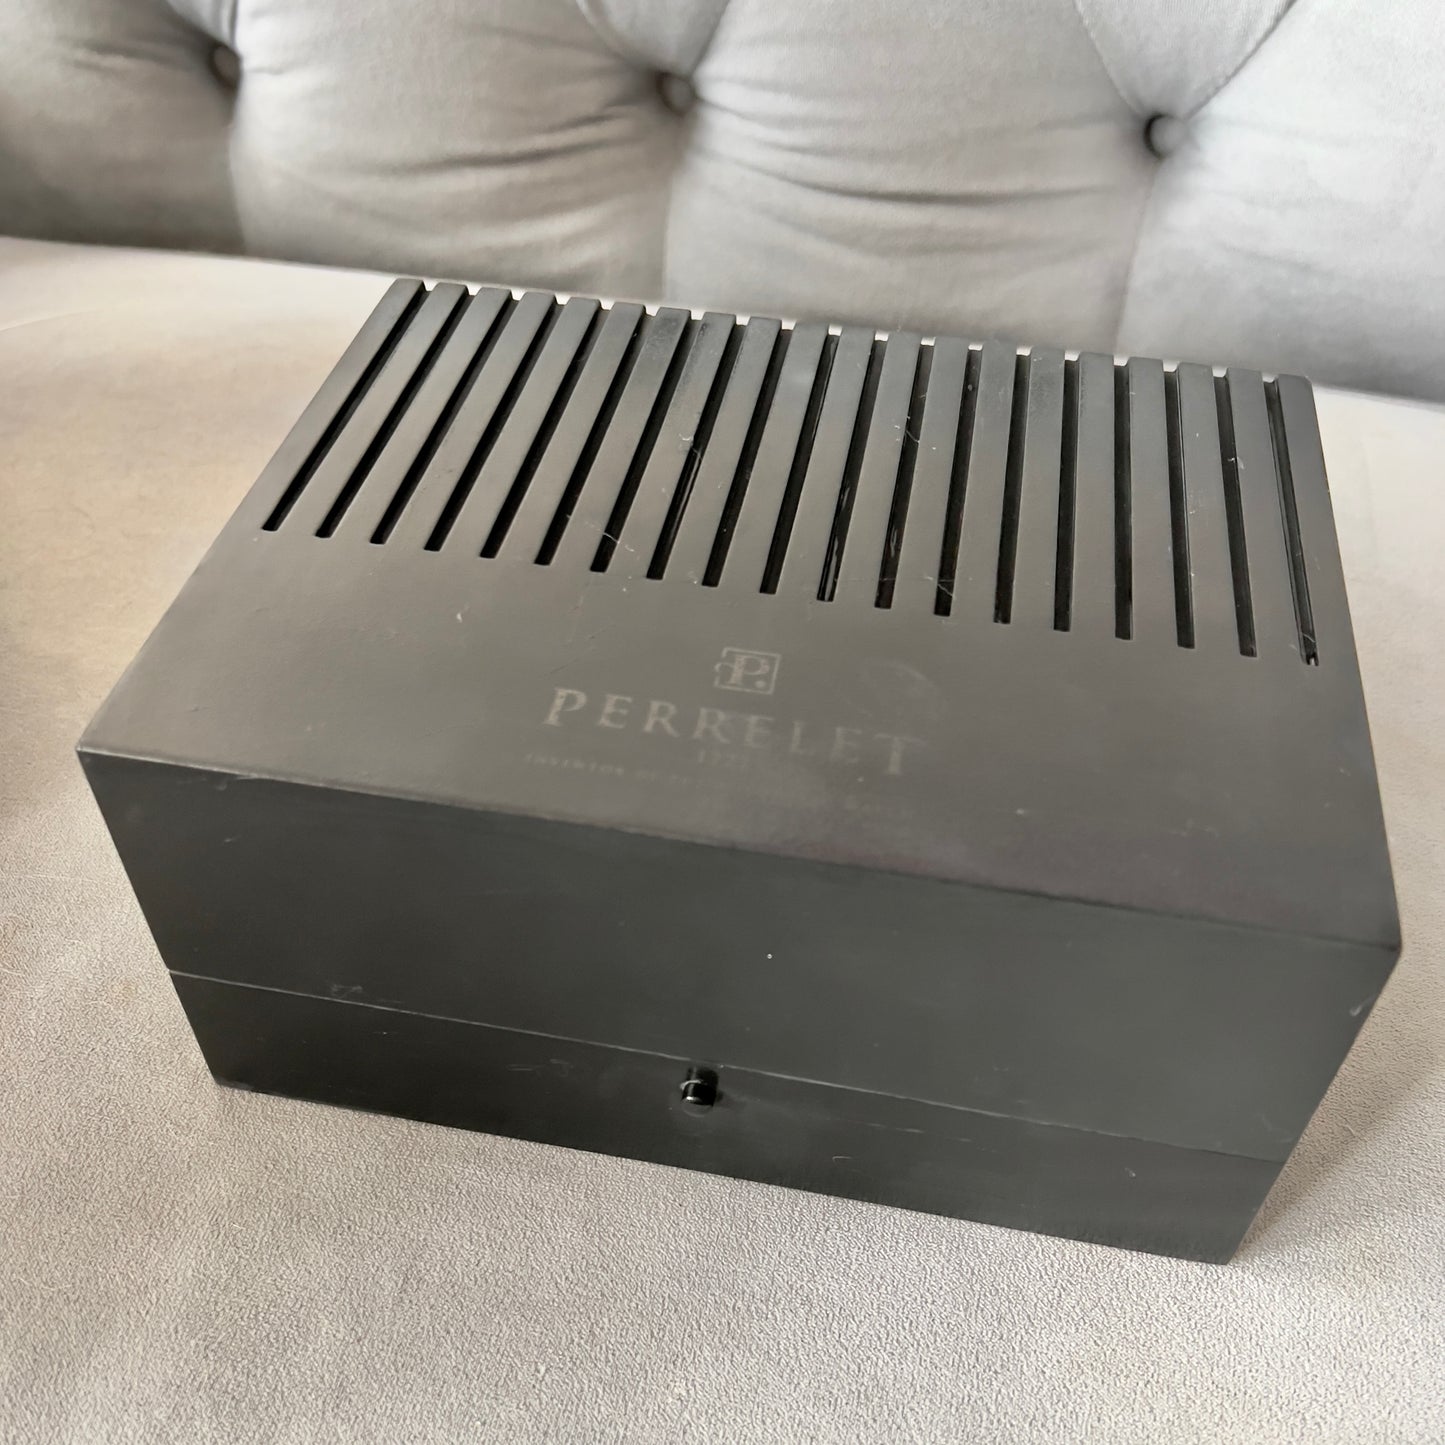 PERRELET Black Wooden Box + Outer Boxes